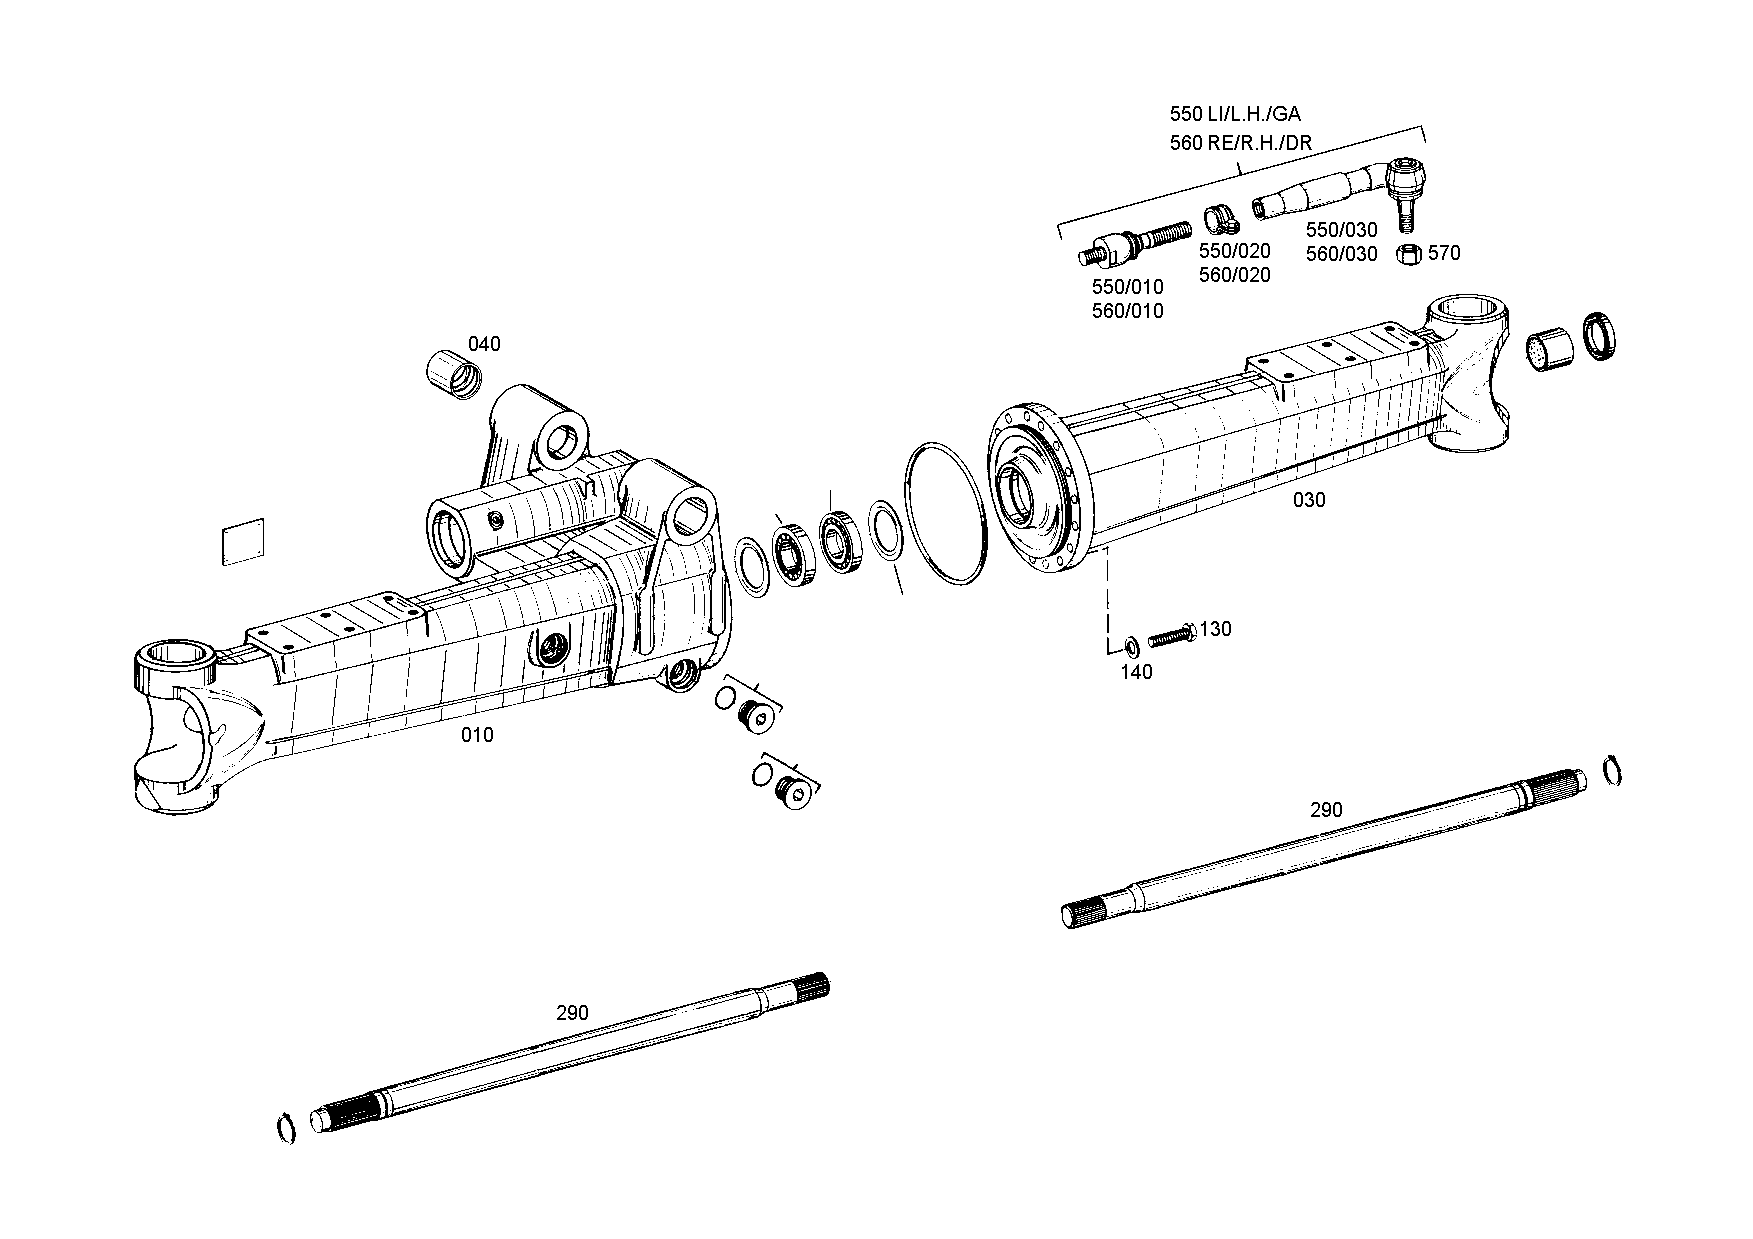 drawing for LIEBHERR GMBH 7027750 - TIE ROD (figure 2)